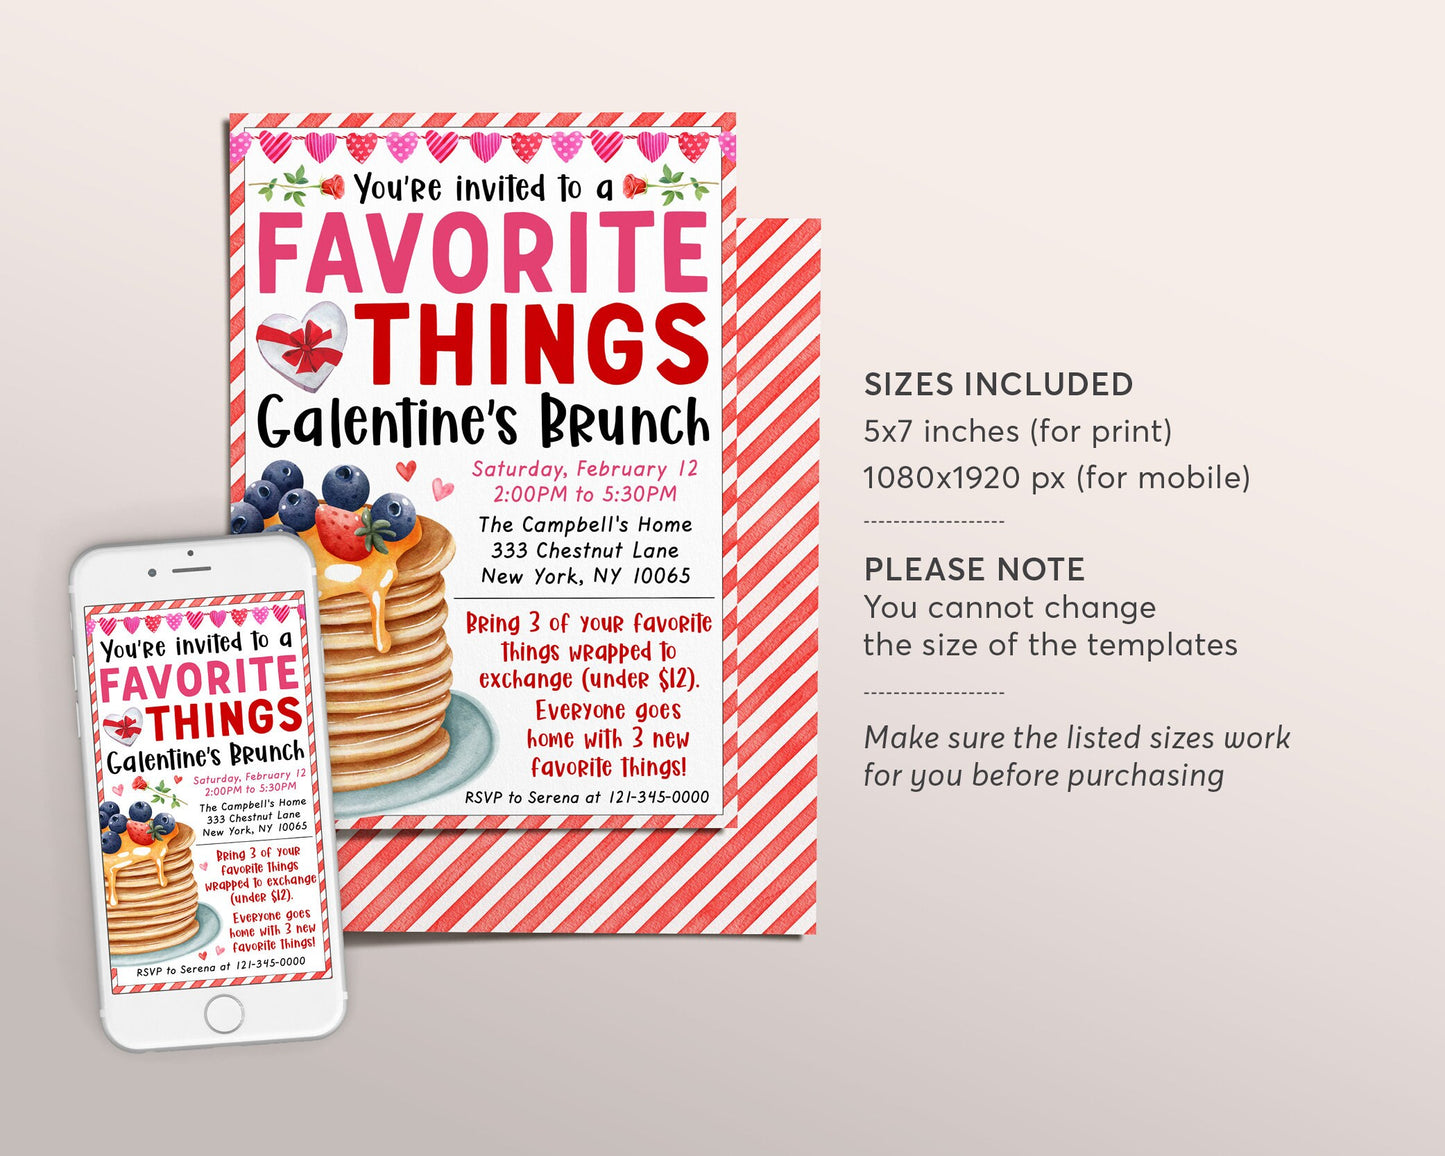 Valentines Day Brunch Invitation Editable Template, Galentine's Favorite Things Party Breakfast Invite Gift Exchange Celebration Pancakes